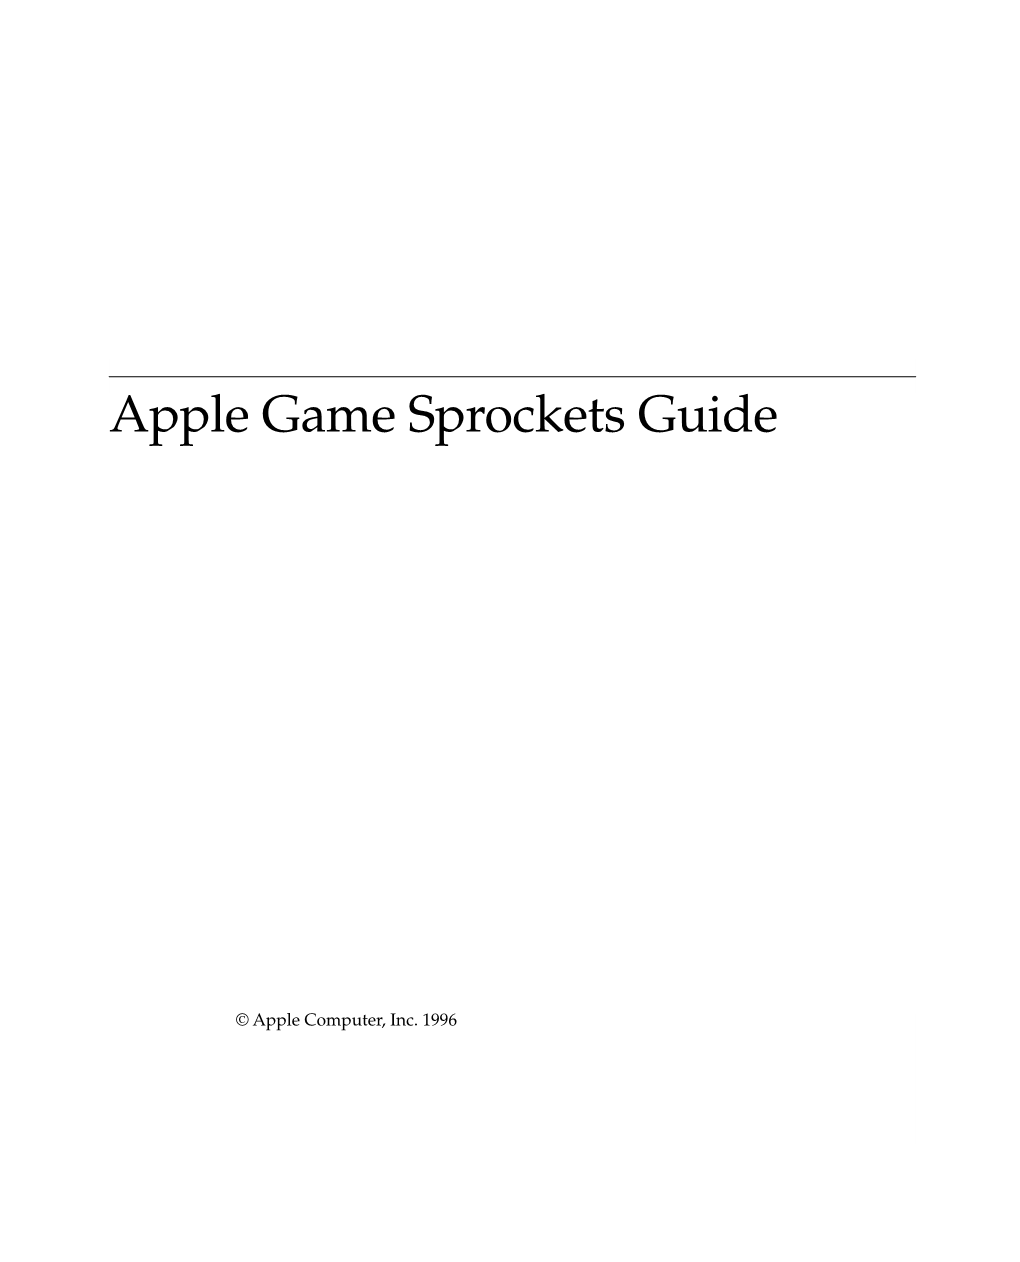 Apple Game Sprockets Guide